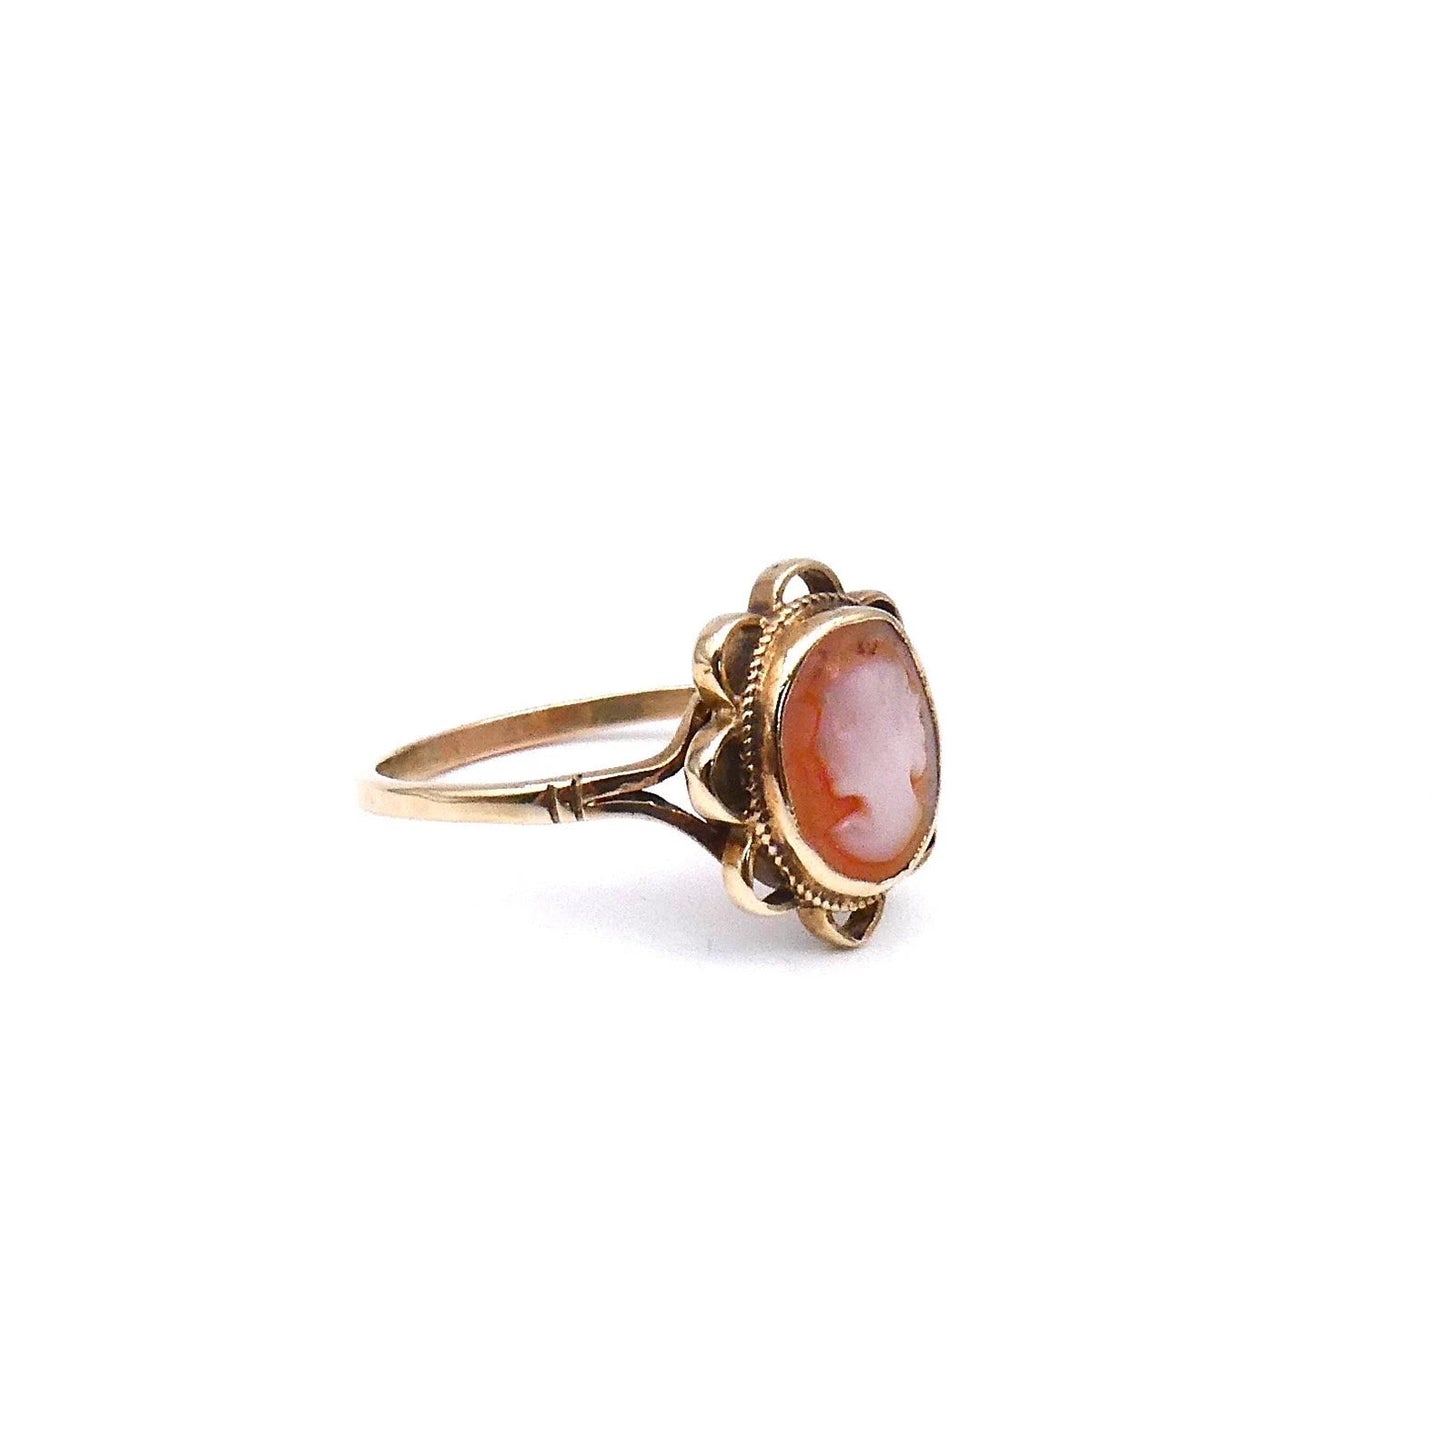 Vintage cameo ring 9kt gold with a scalloped gold edge - Collected